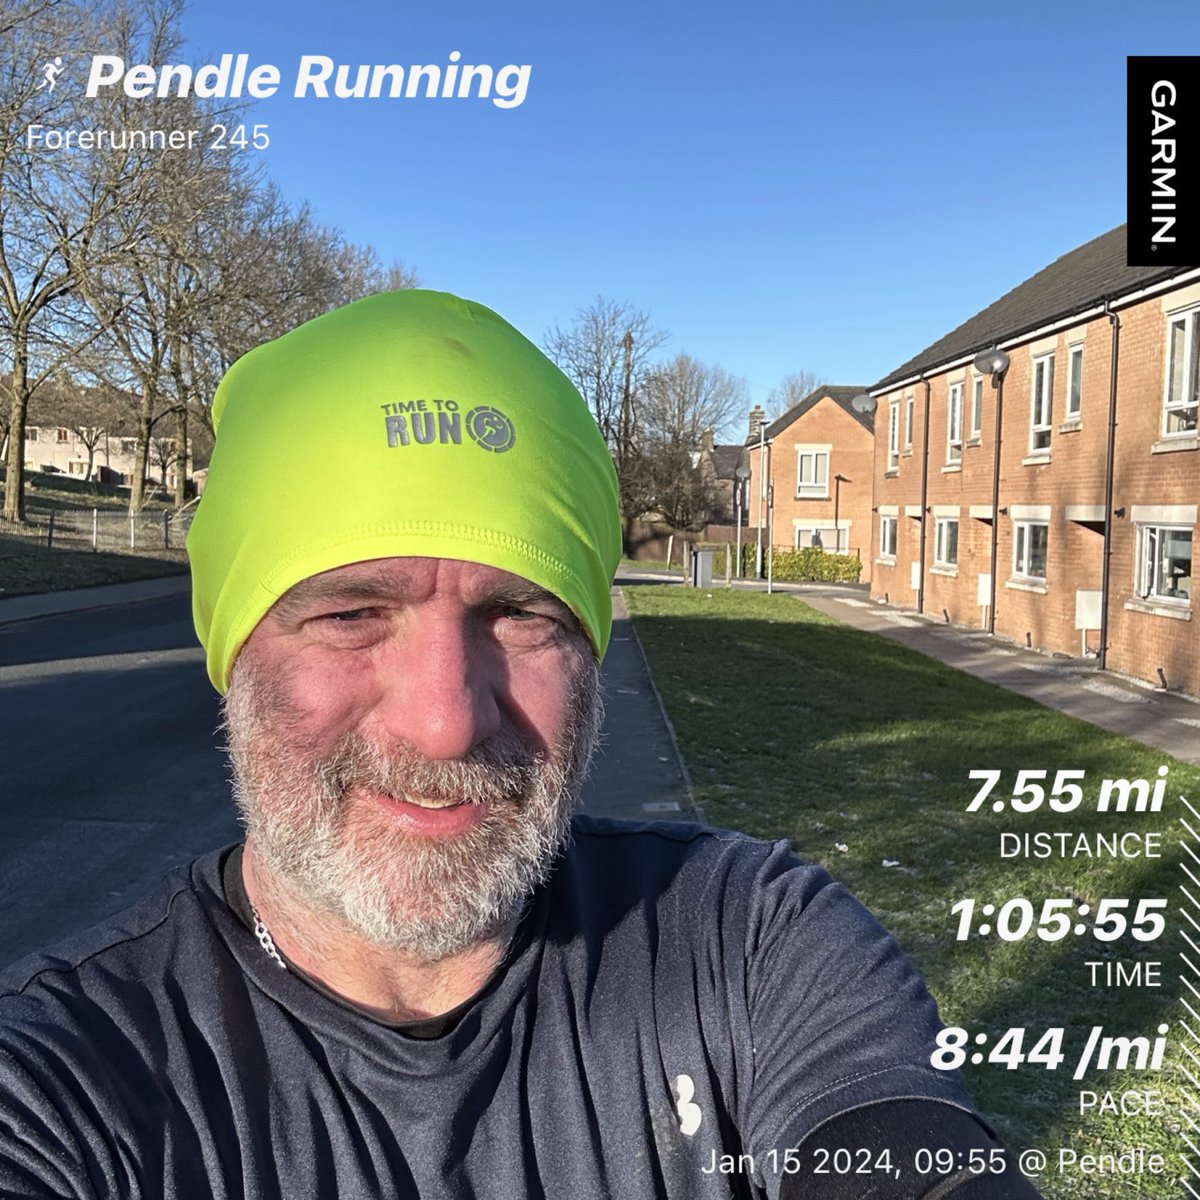 Nice start to the week 🥶 cold, crisp, sunny miles. Enjoyed that. Onwards #runhappy #beawesome #headspace #ukrunchat #redfoxrunclub 👊🏃🏻‍♂️🏃🏻‍♂️👊 #beatyesterday